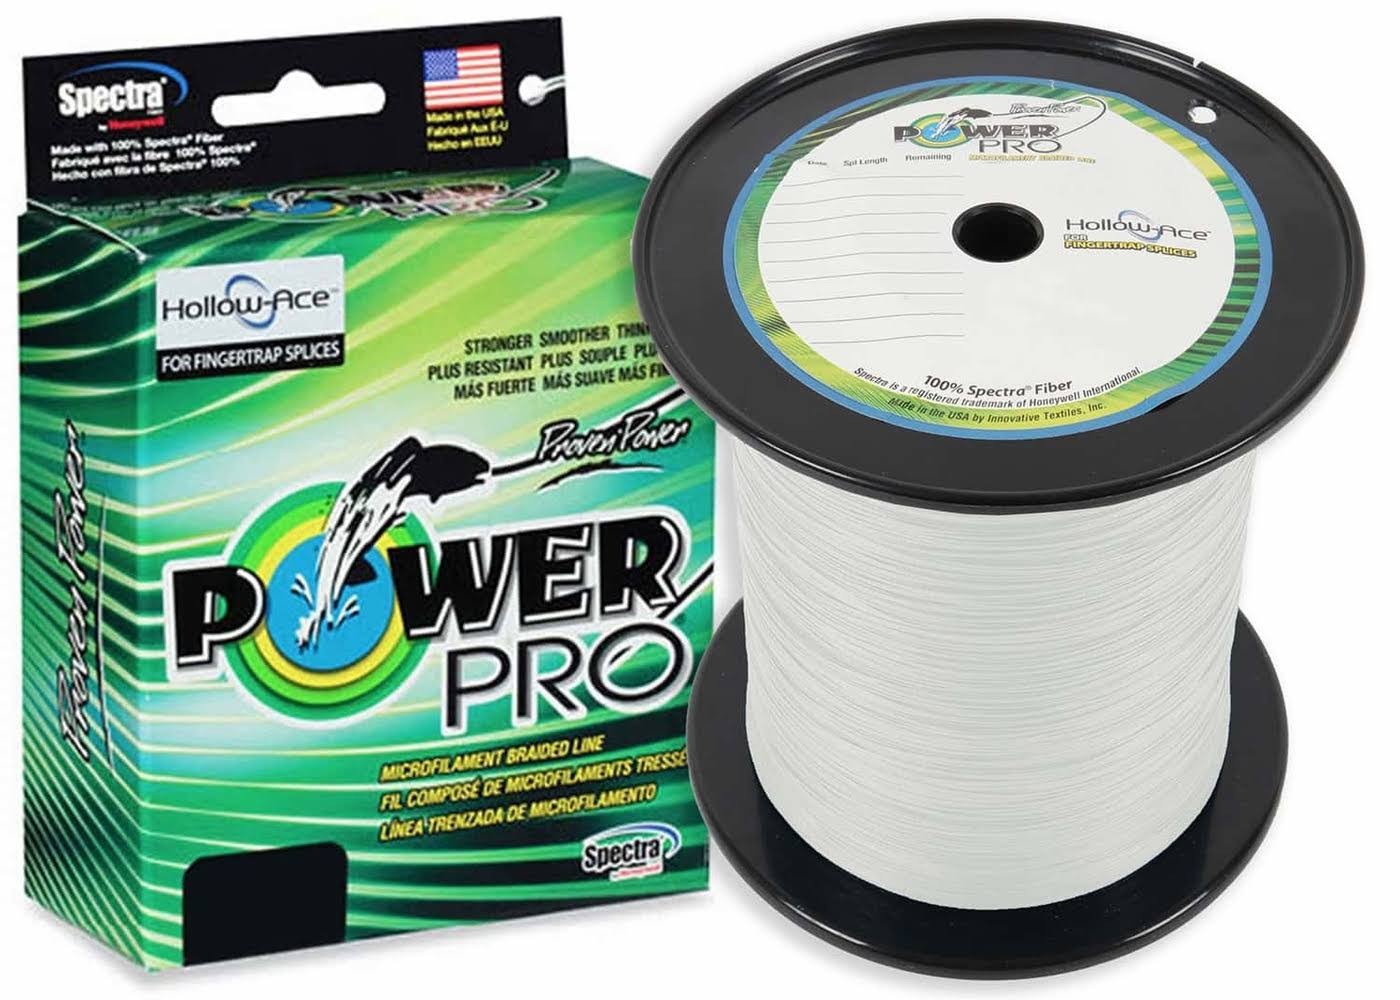 PowerPro Hollow-Ace Braided Spectra Fishing Line - 3000 yds, 80 lb., White